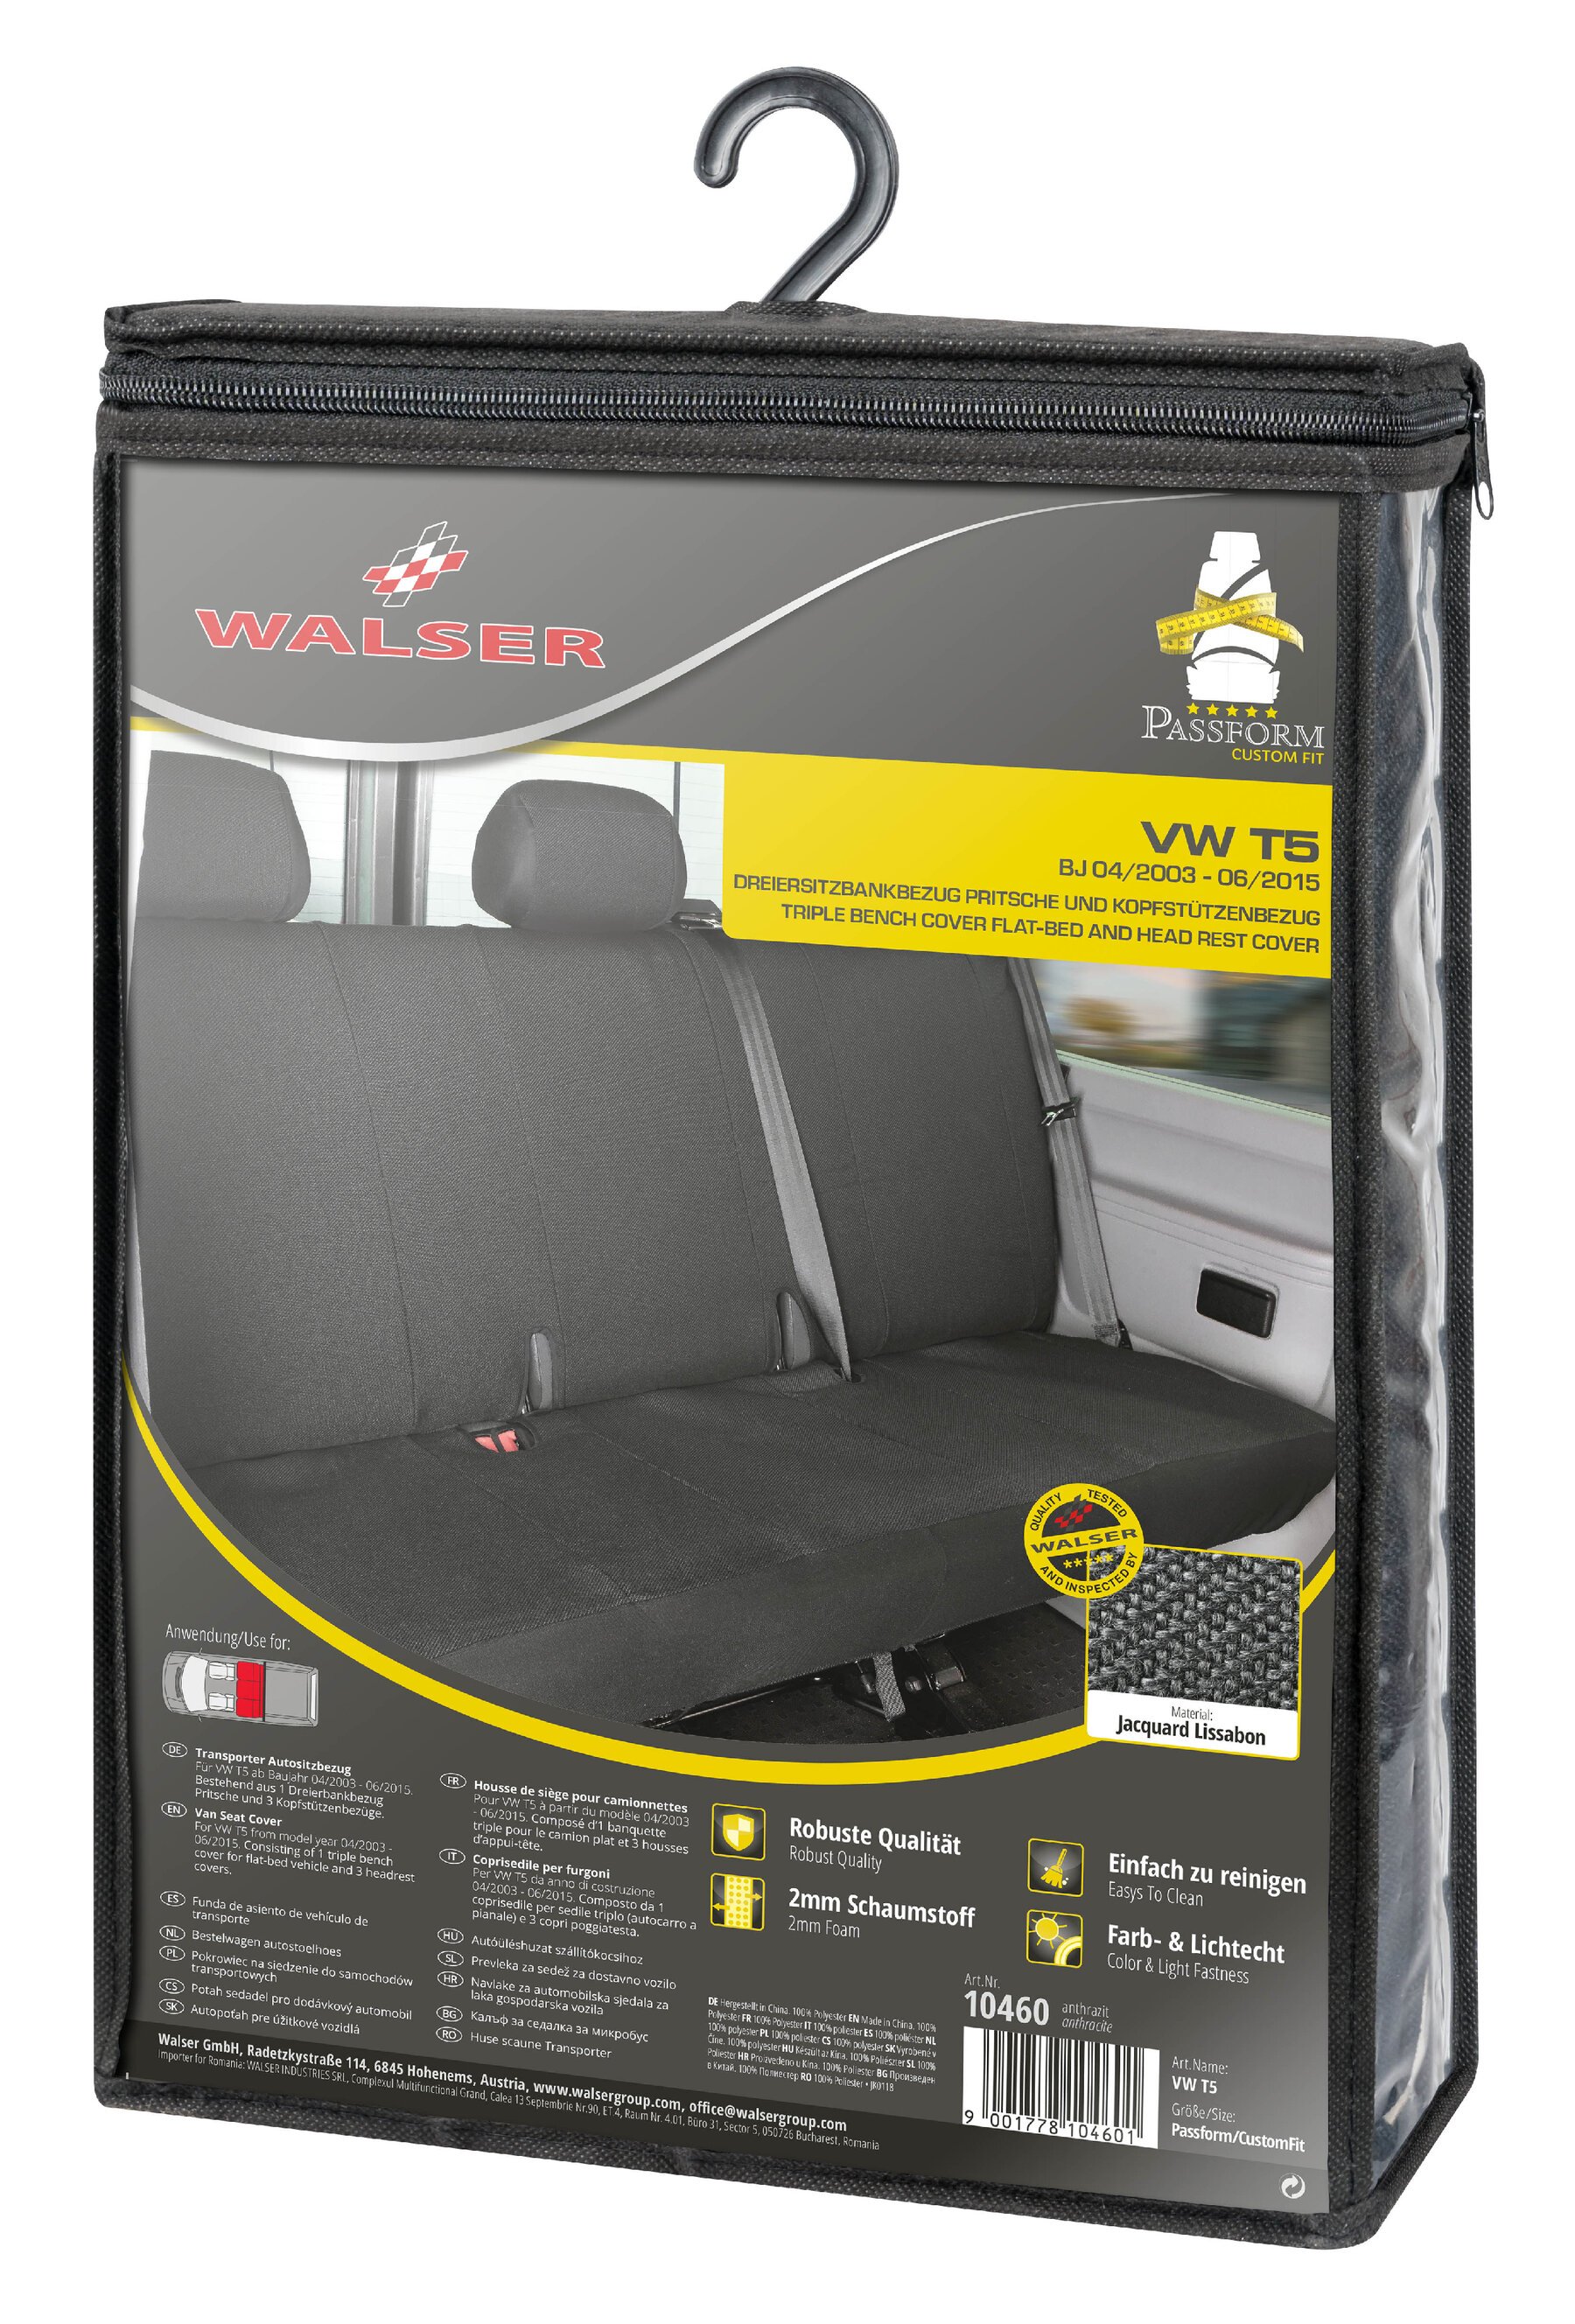 Car Seat cover Transporter made of fabric for VW T5, 3-seater bench platform